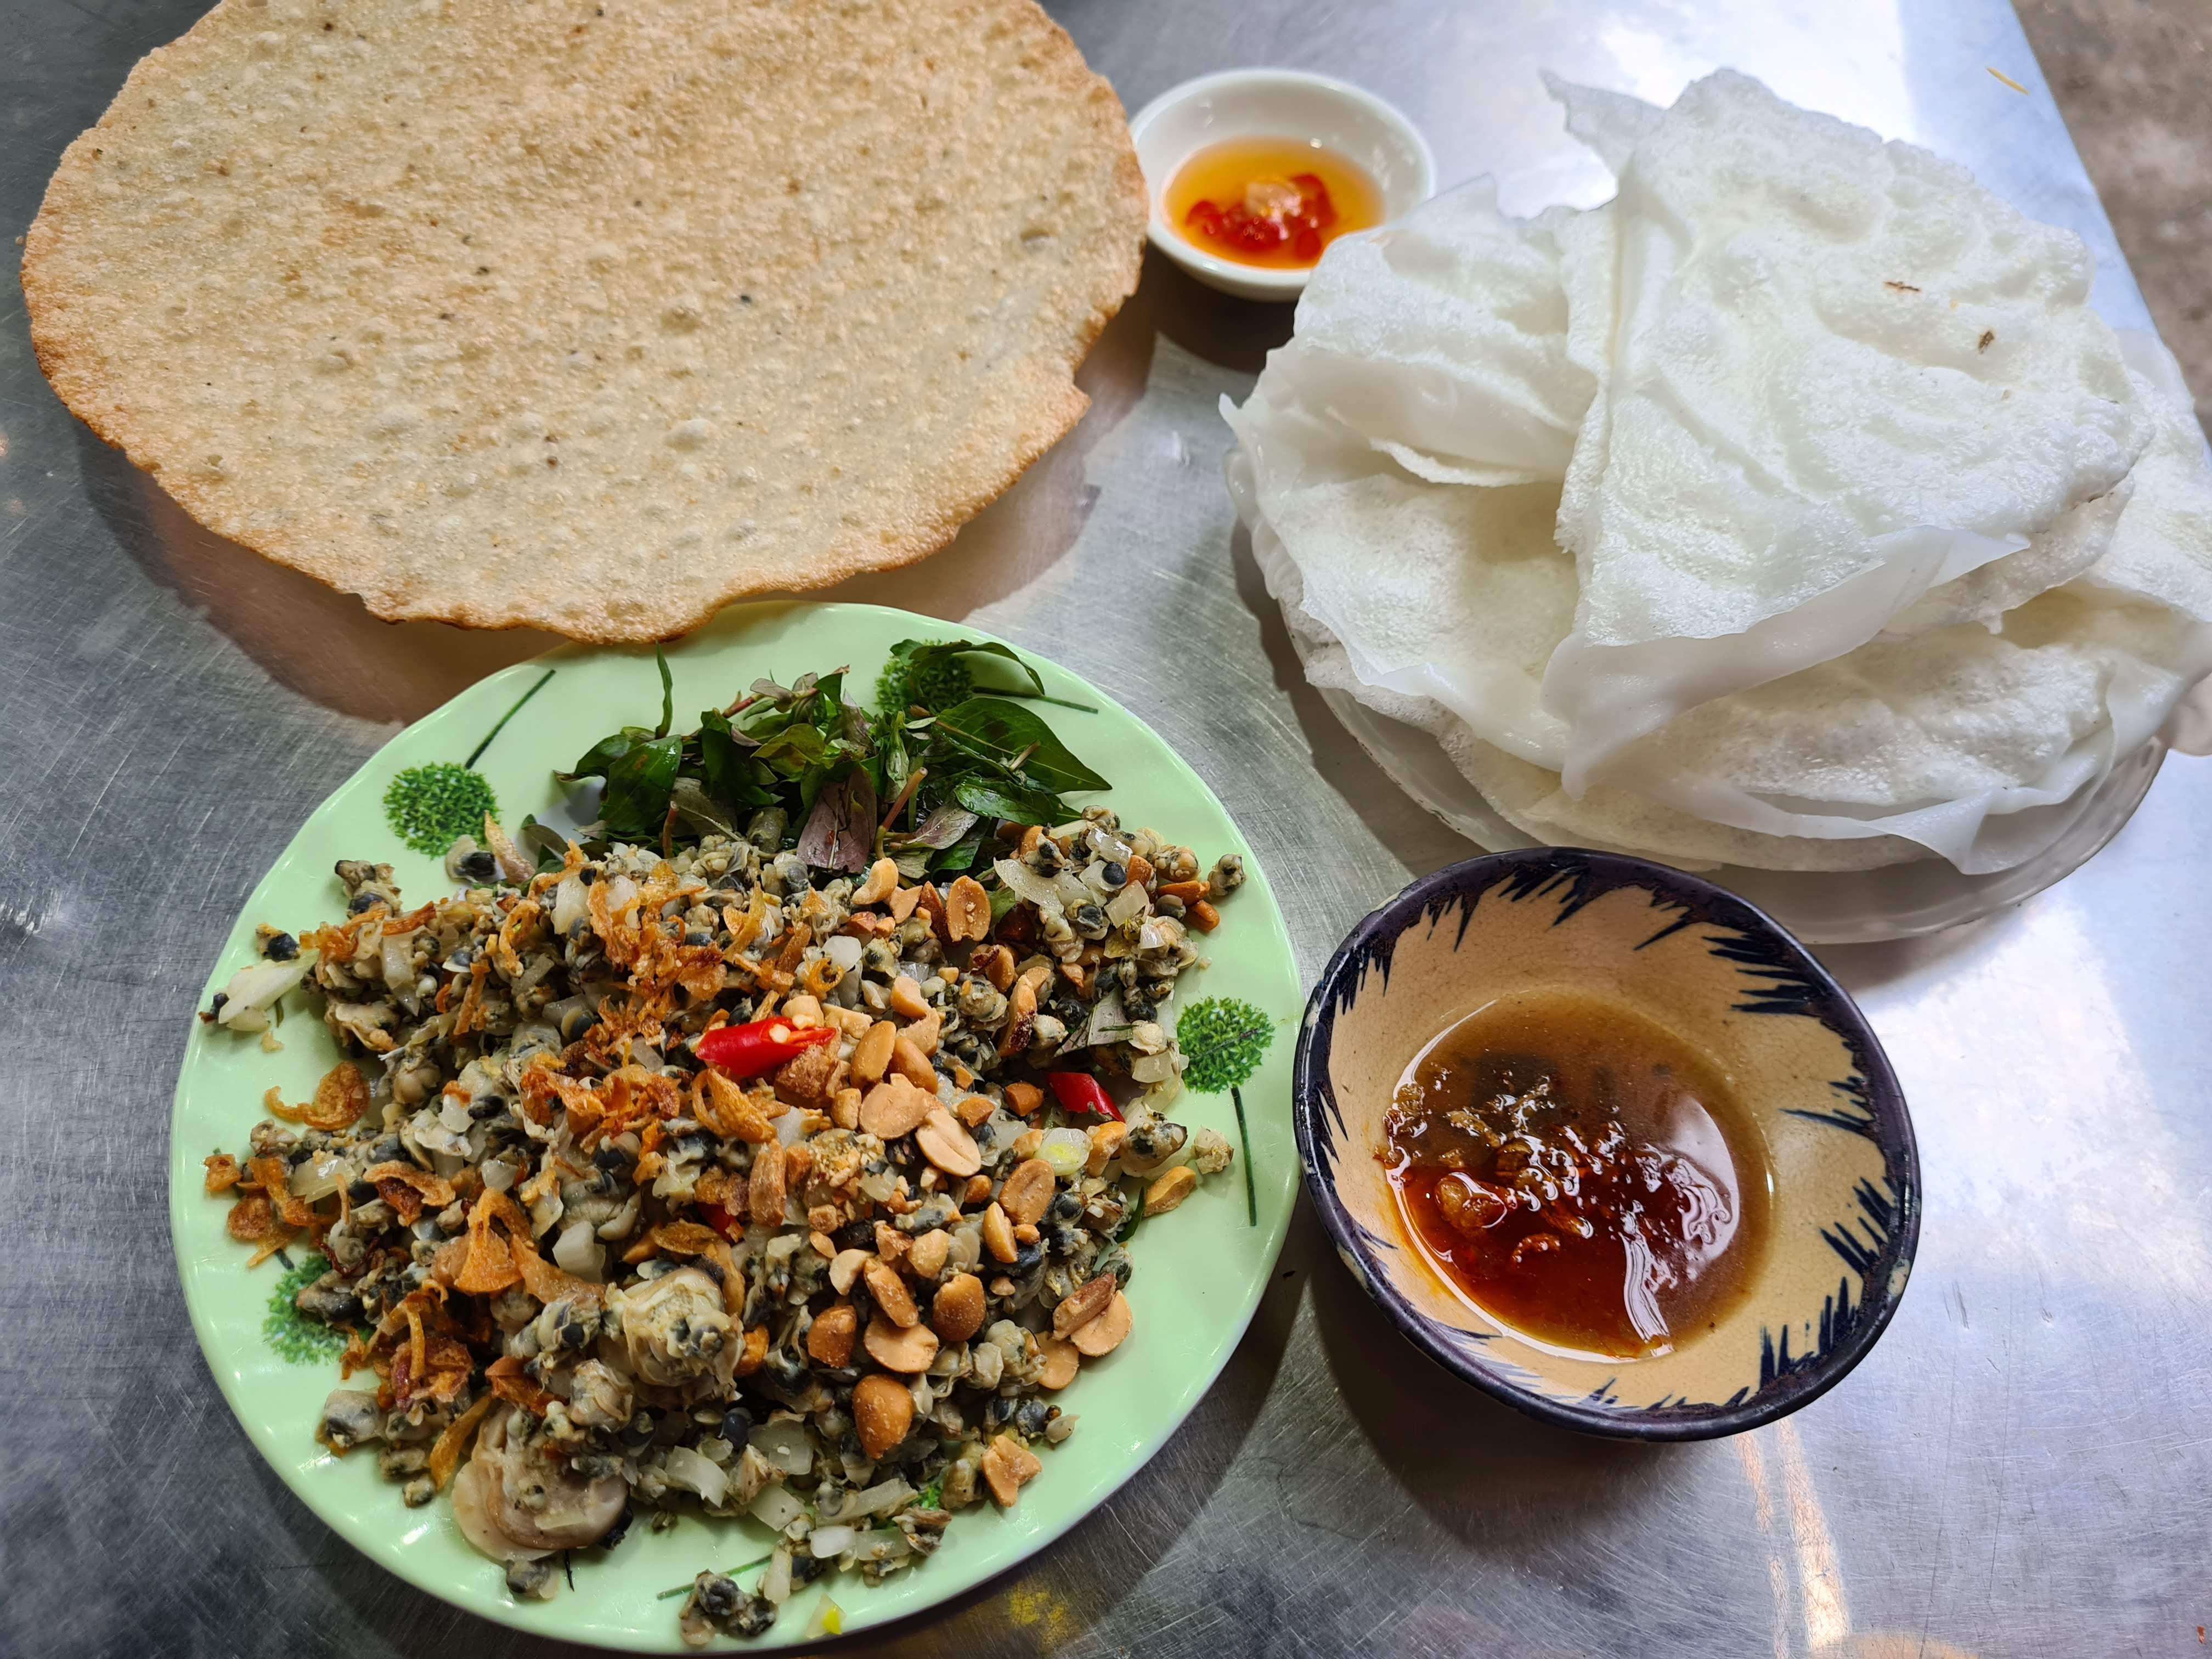 Hen xao and banh dap dishes in Hoi An Ancient Town, Quang Nam Province, Vietnam. Photo: Duy Khang / Tuoi Tre